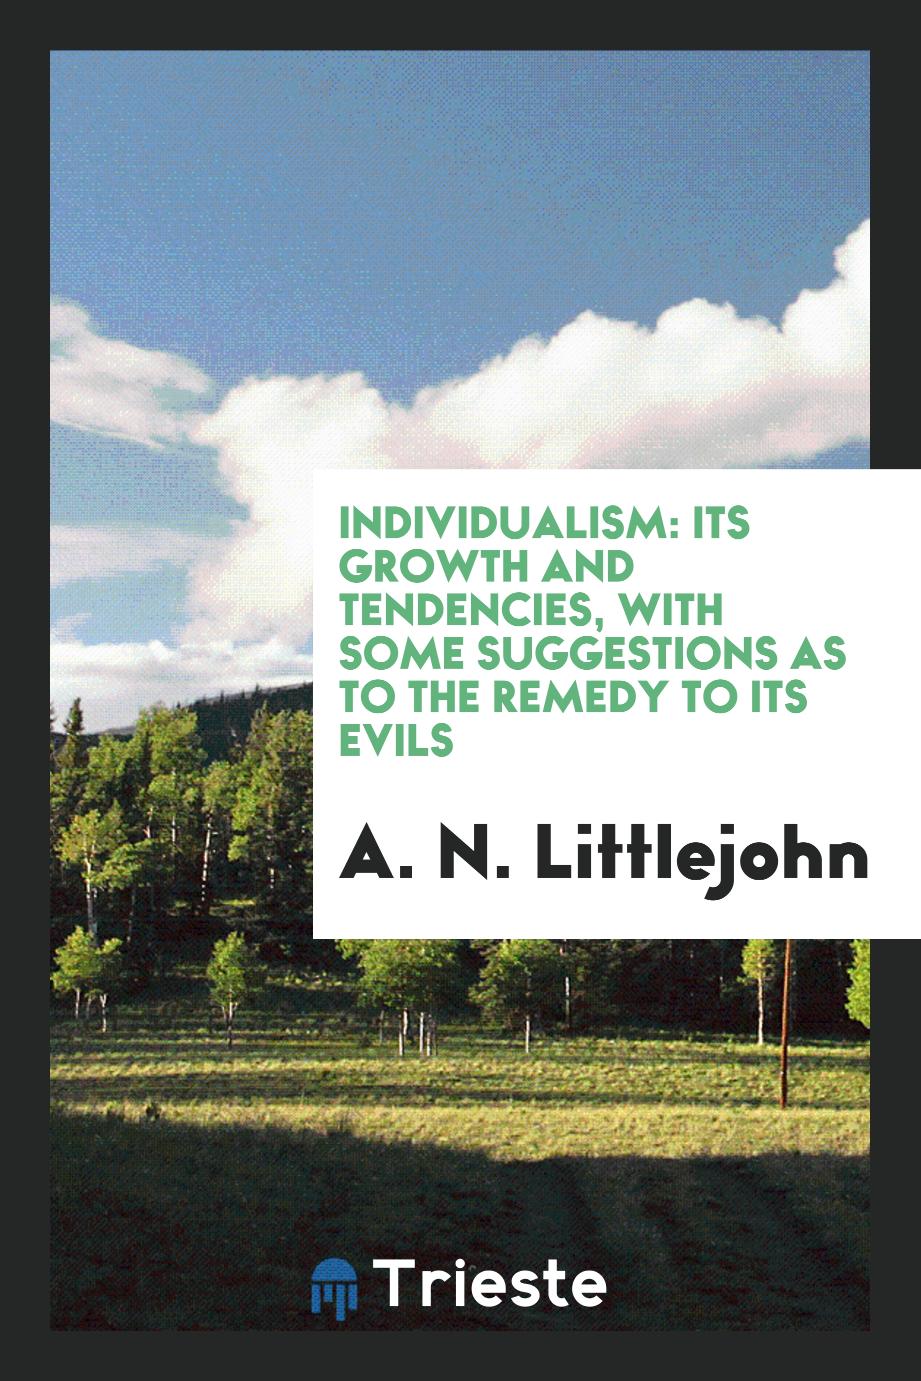 Individualism: Its Growth and Tendencies, with Some Suggestions as to the Remedy to Its Evils